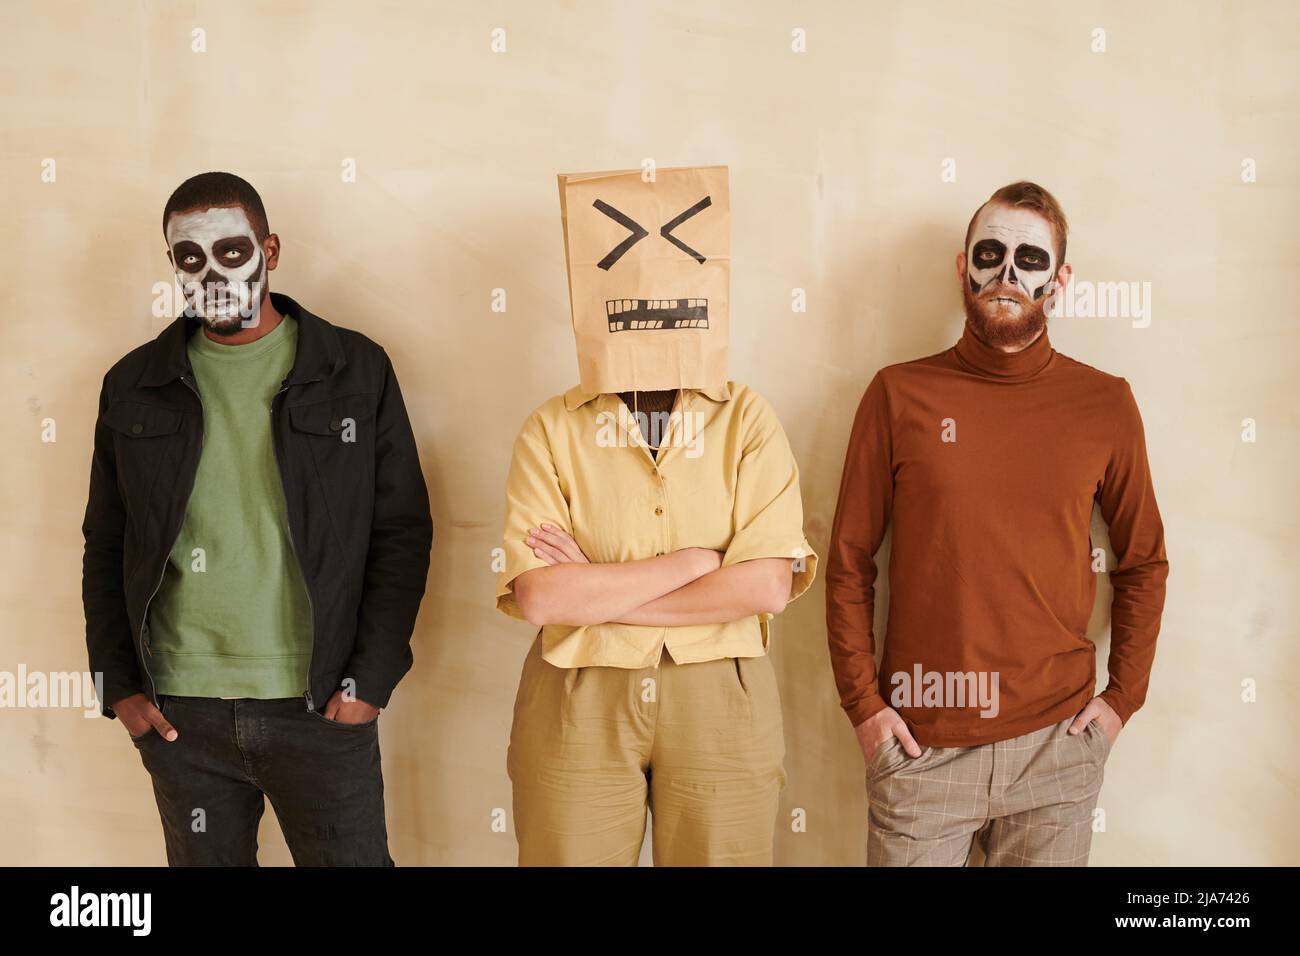 Zombie men with Halloween makeups and woman wearing paper bag with irritated face on head standing against isolated background Stock Photo